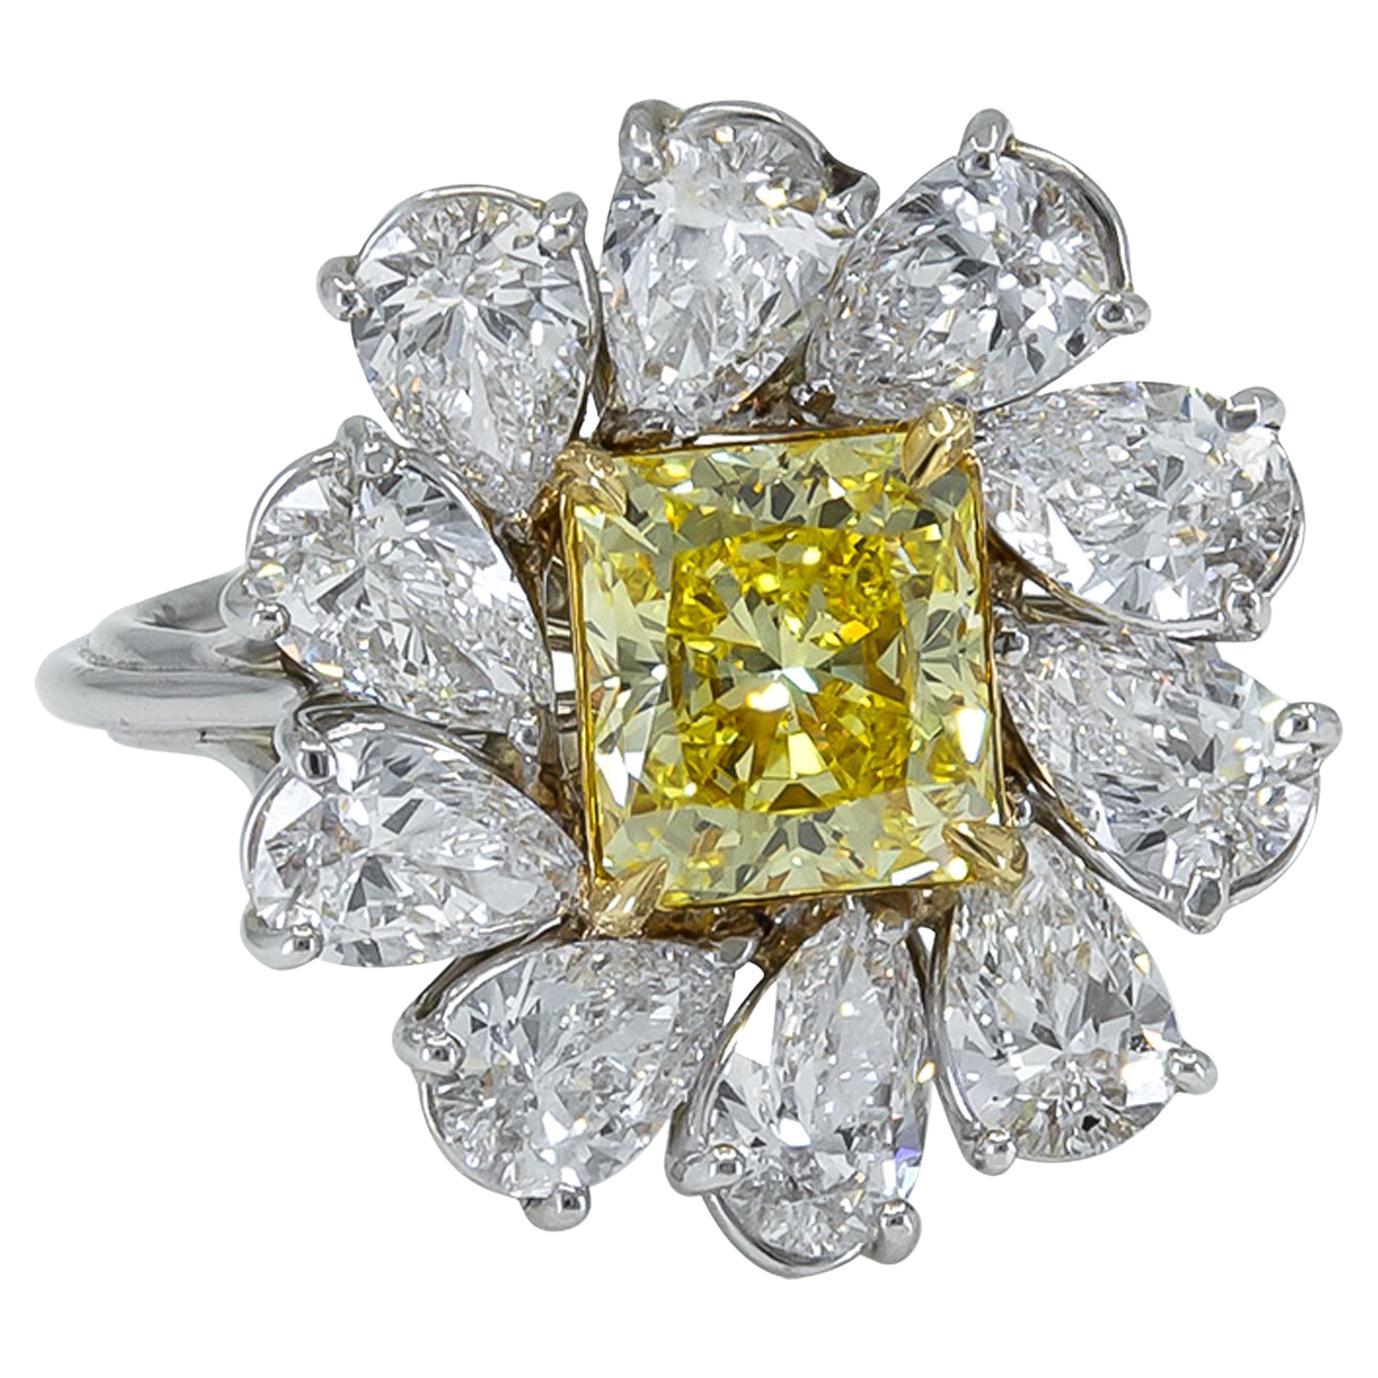 Spectra Fine Jewelry GIA Certified 1.47 Carat Fancy Yellow Diamond Cocktail Ring For Sale